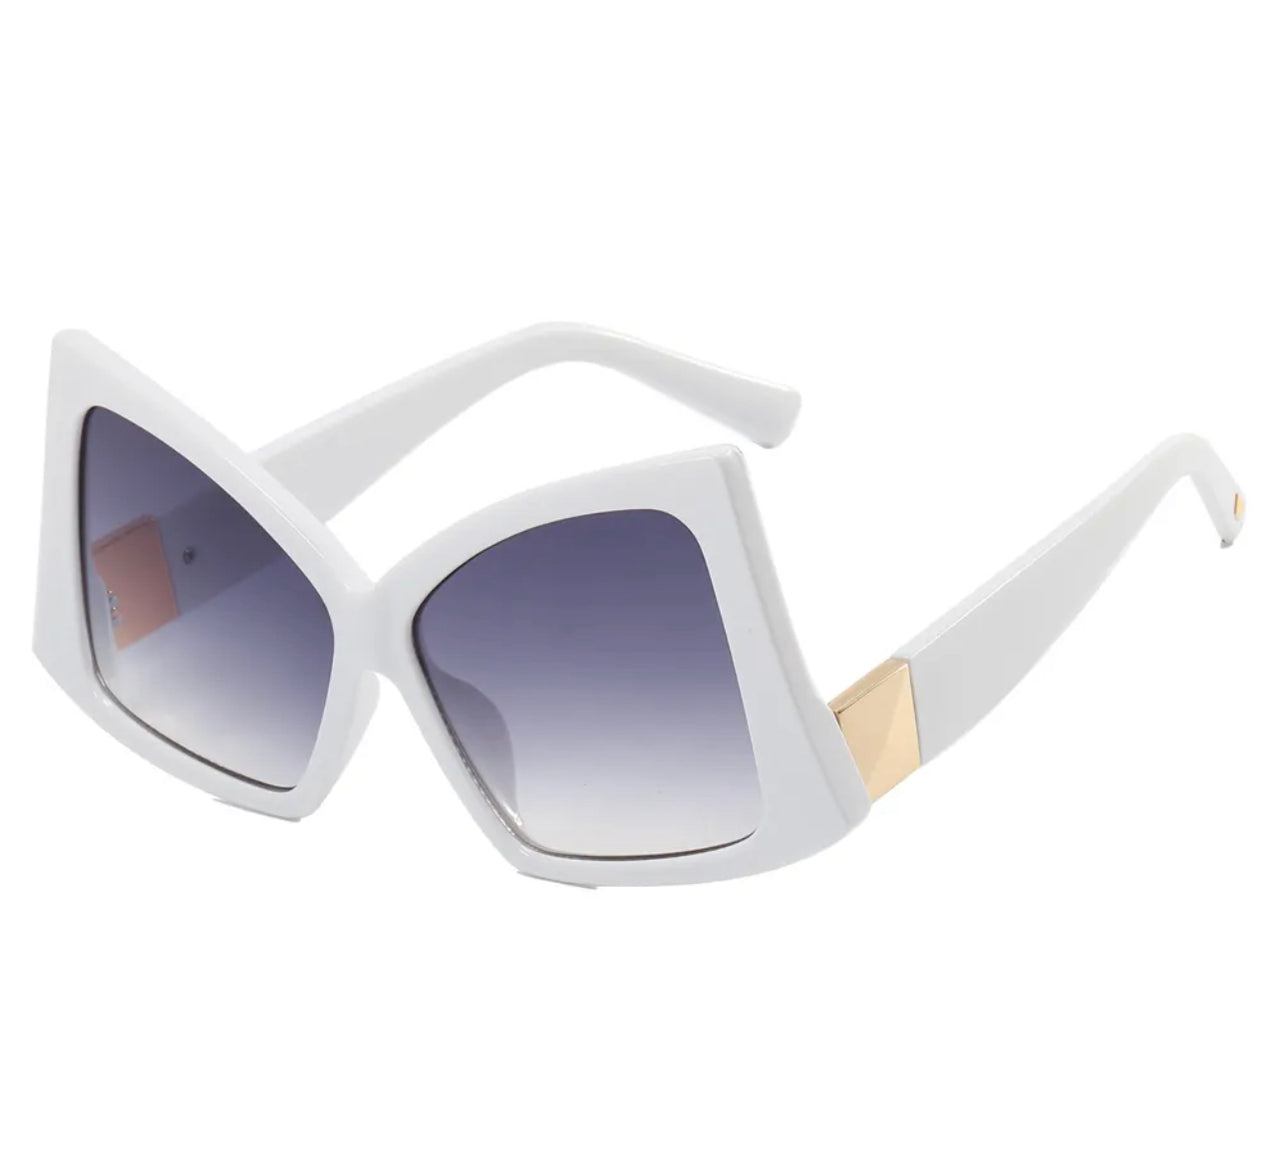 The "BE FLY"  butterfly shades